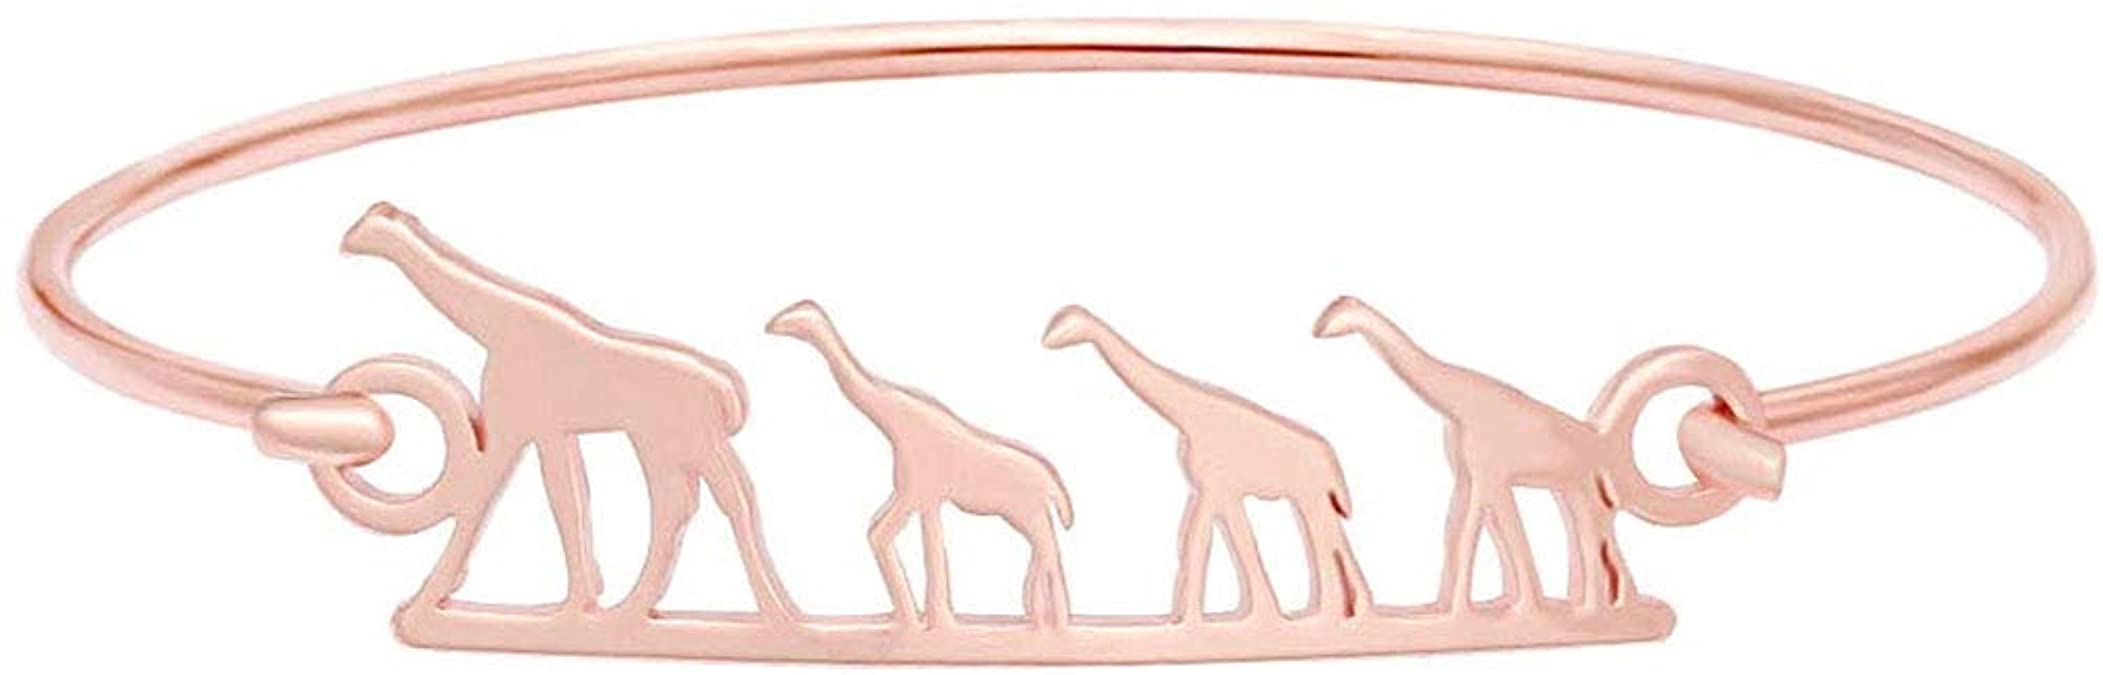 SENFAI Mama and Her 3 Children Family Bangle Bracelet for Mom and Daughter Triplets